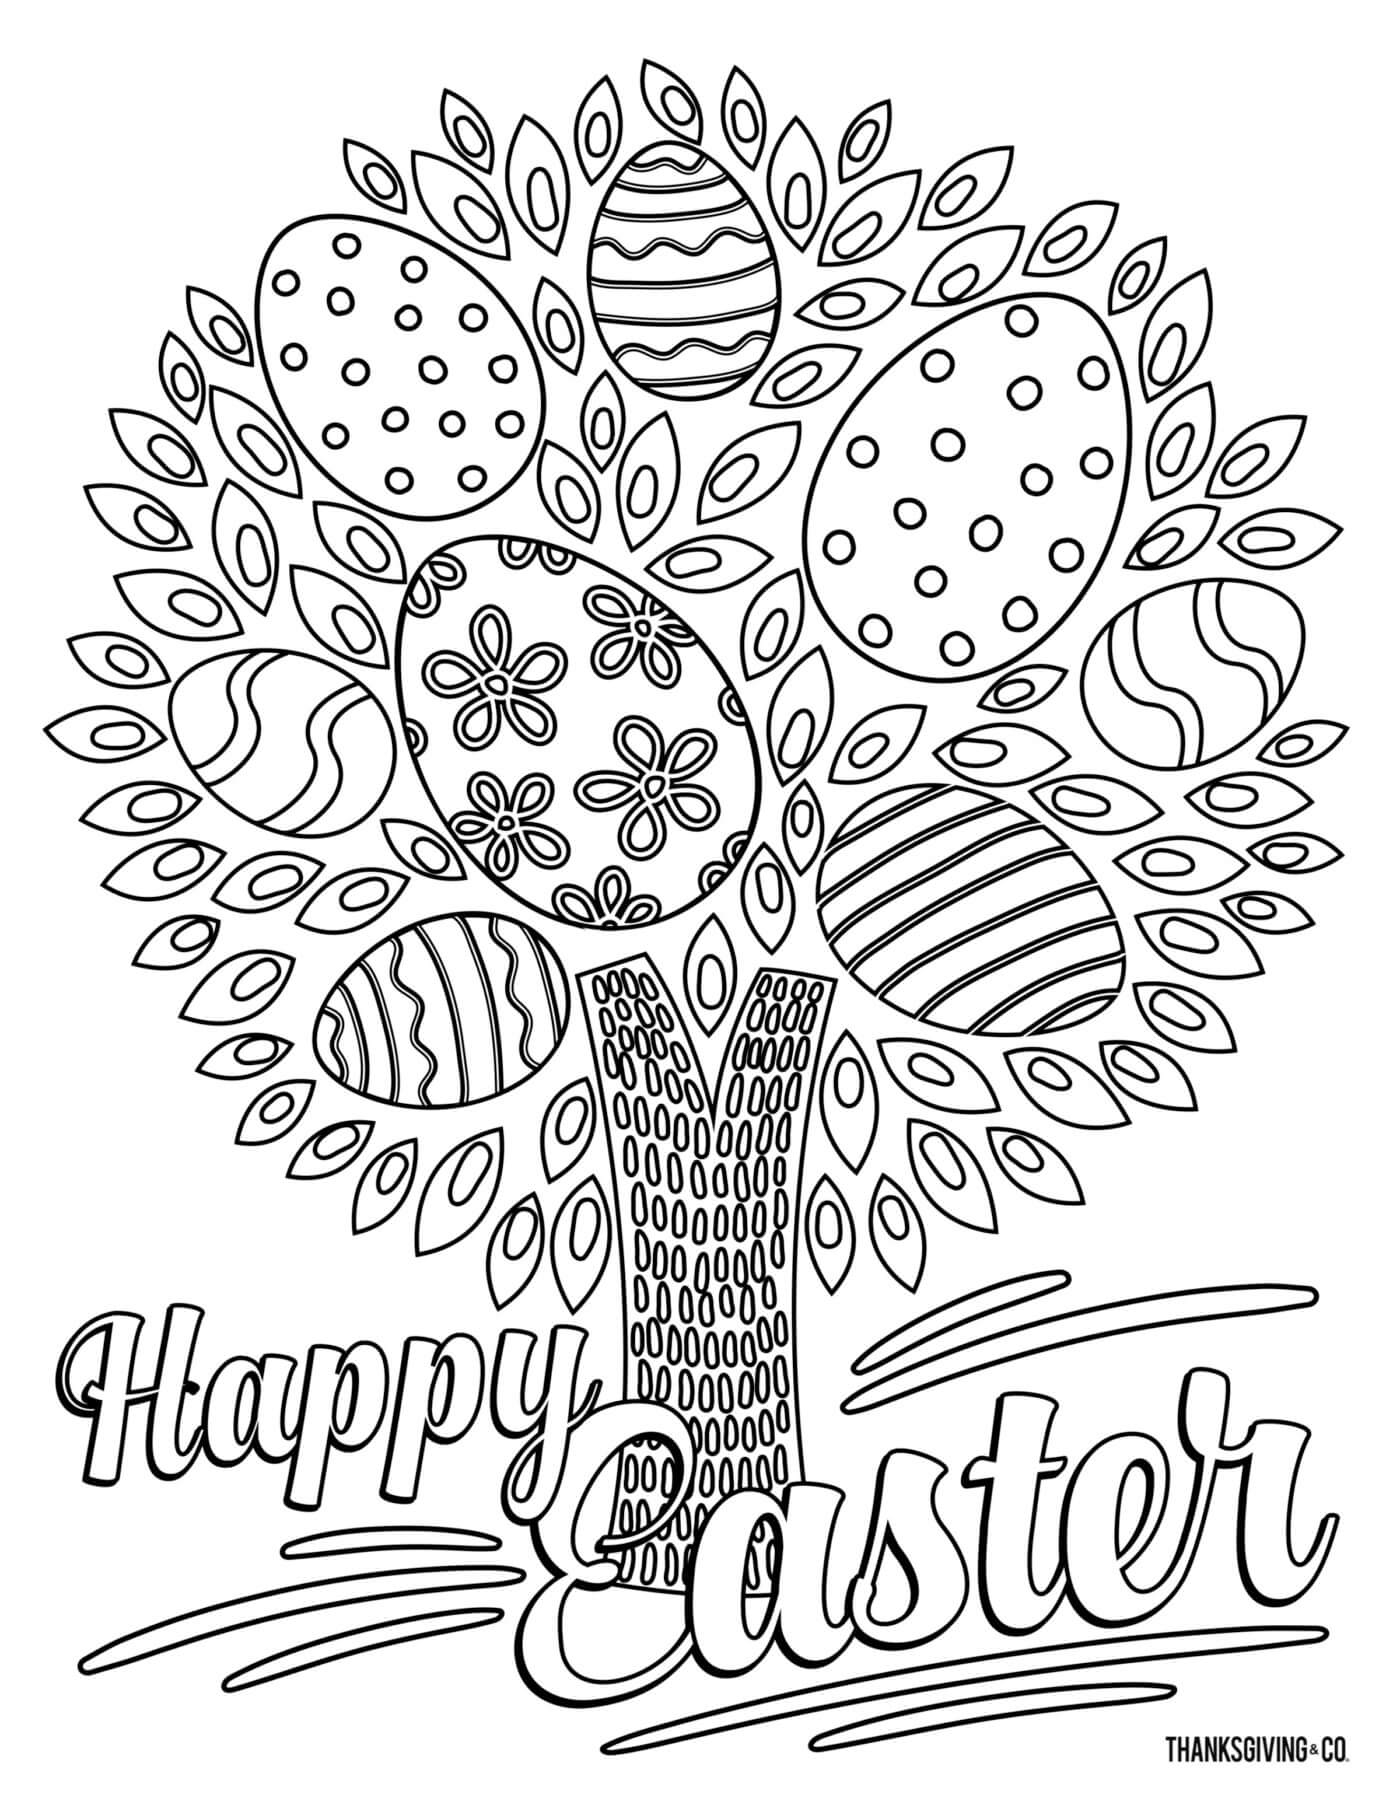 20 Printable Adult Easter Coloring Pages for 20   Happier Human